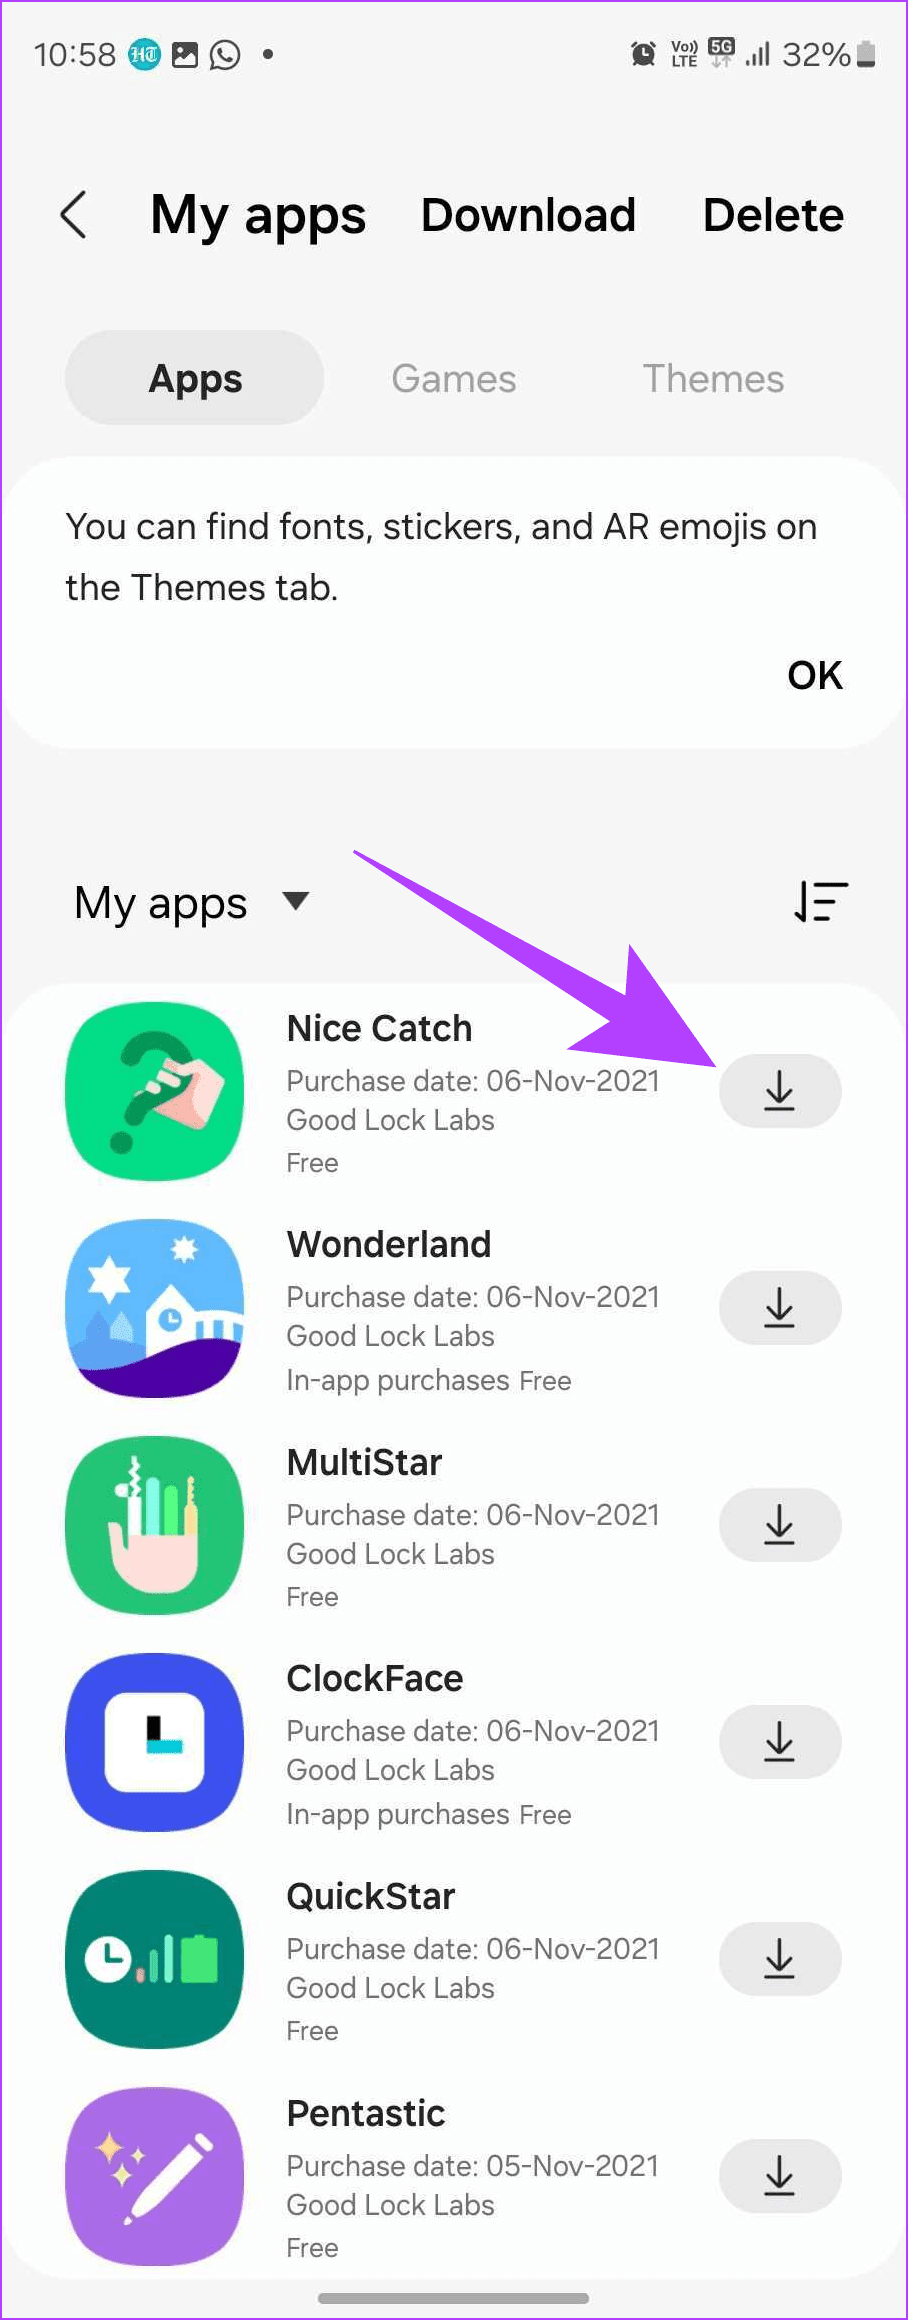 tap the download button next to the app